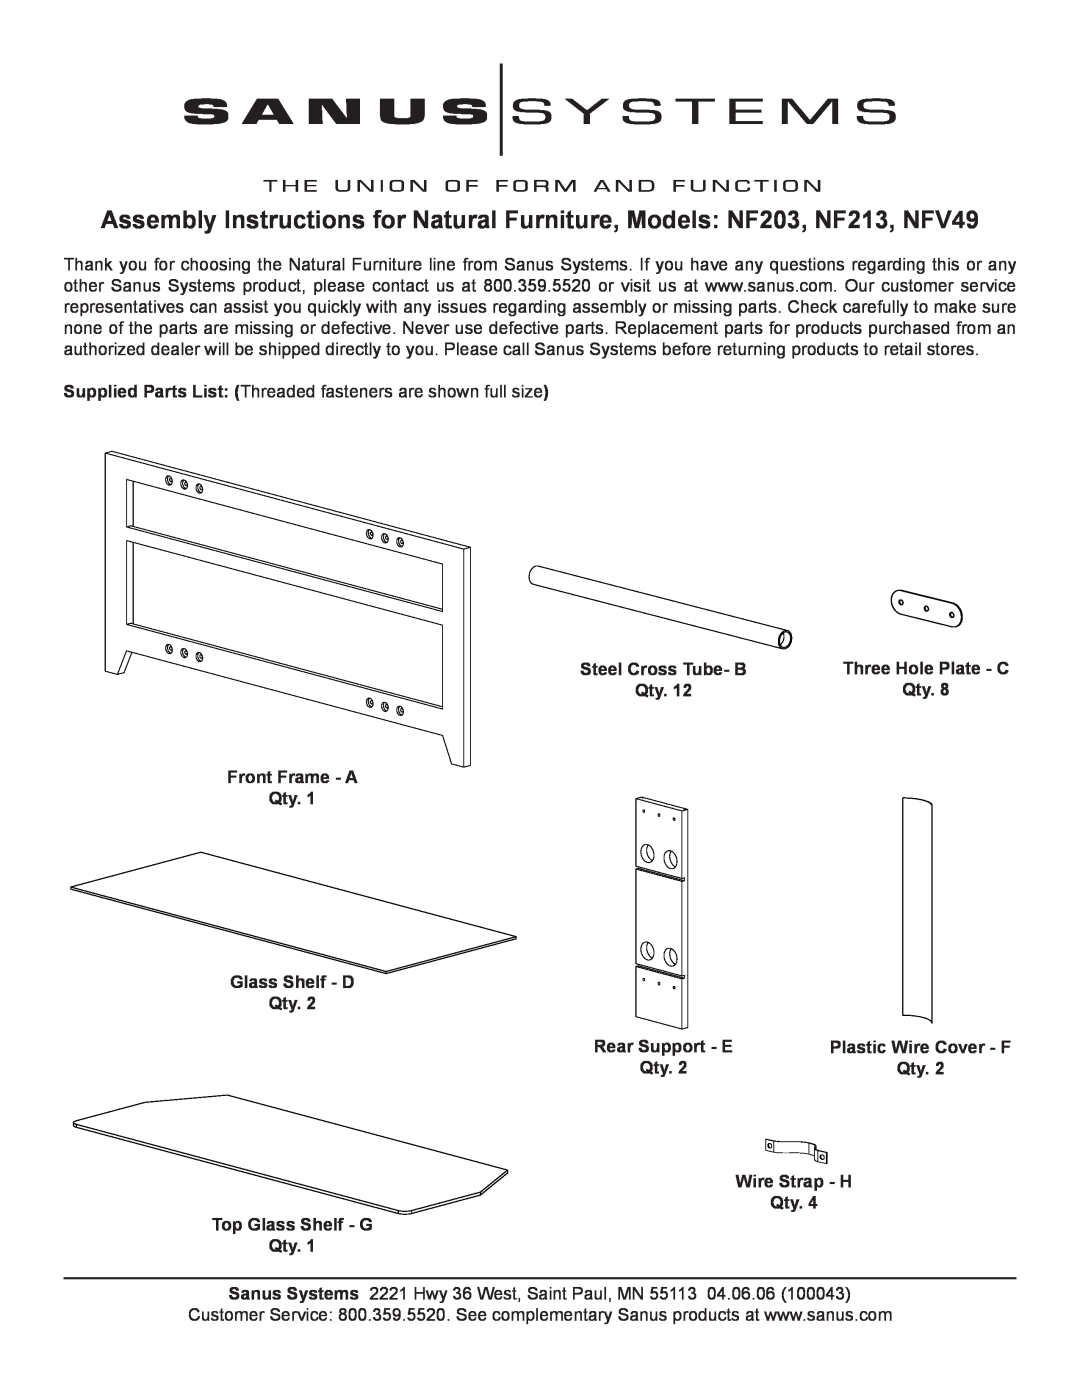 Sanus Systems NF213, NFV49 manual Steel Cross Tube- B, Front Frame - A Qty. Glass Shelf - D Qty, Rear Support - E 